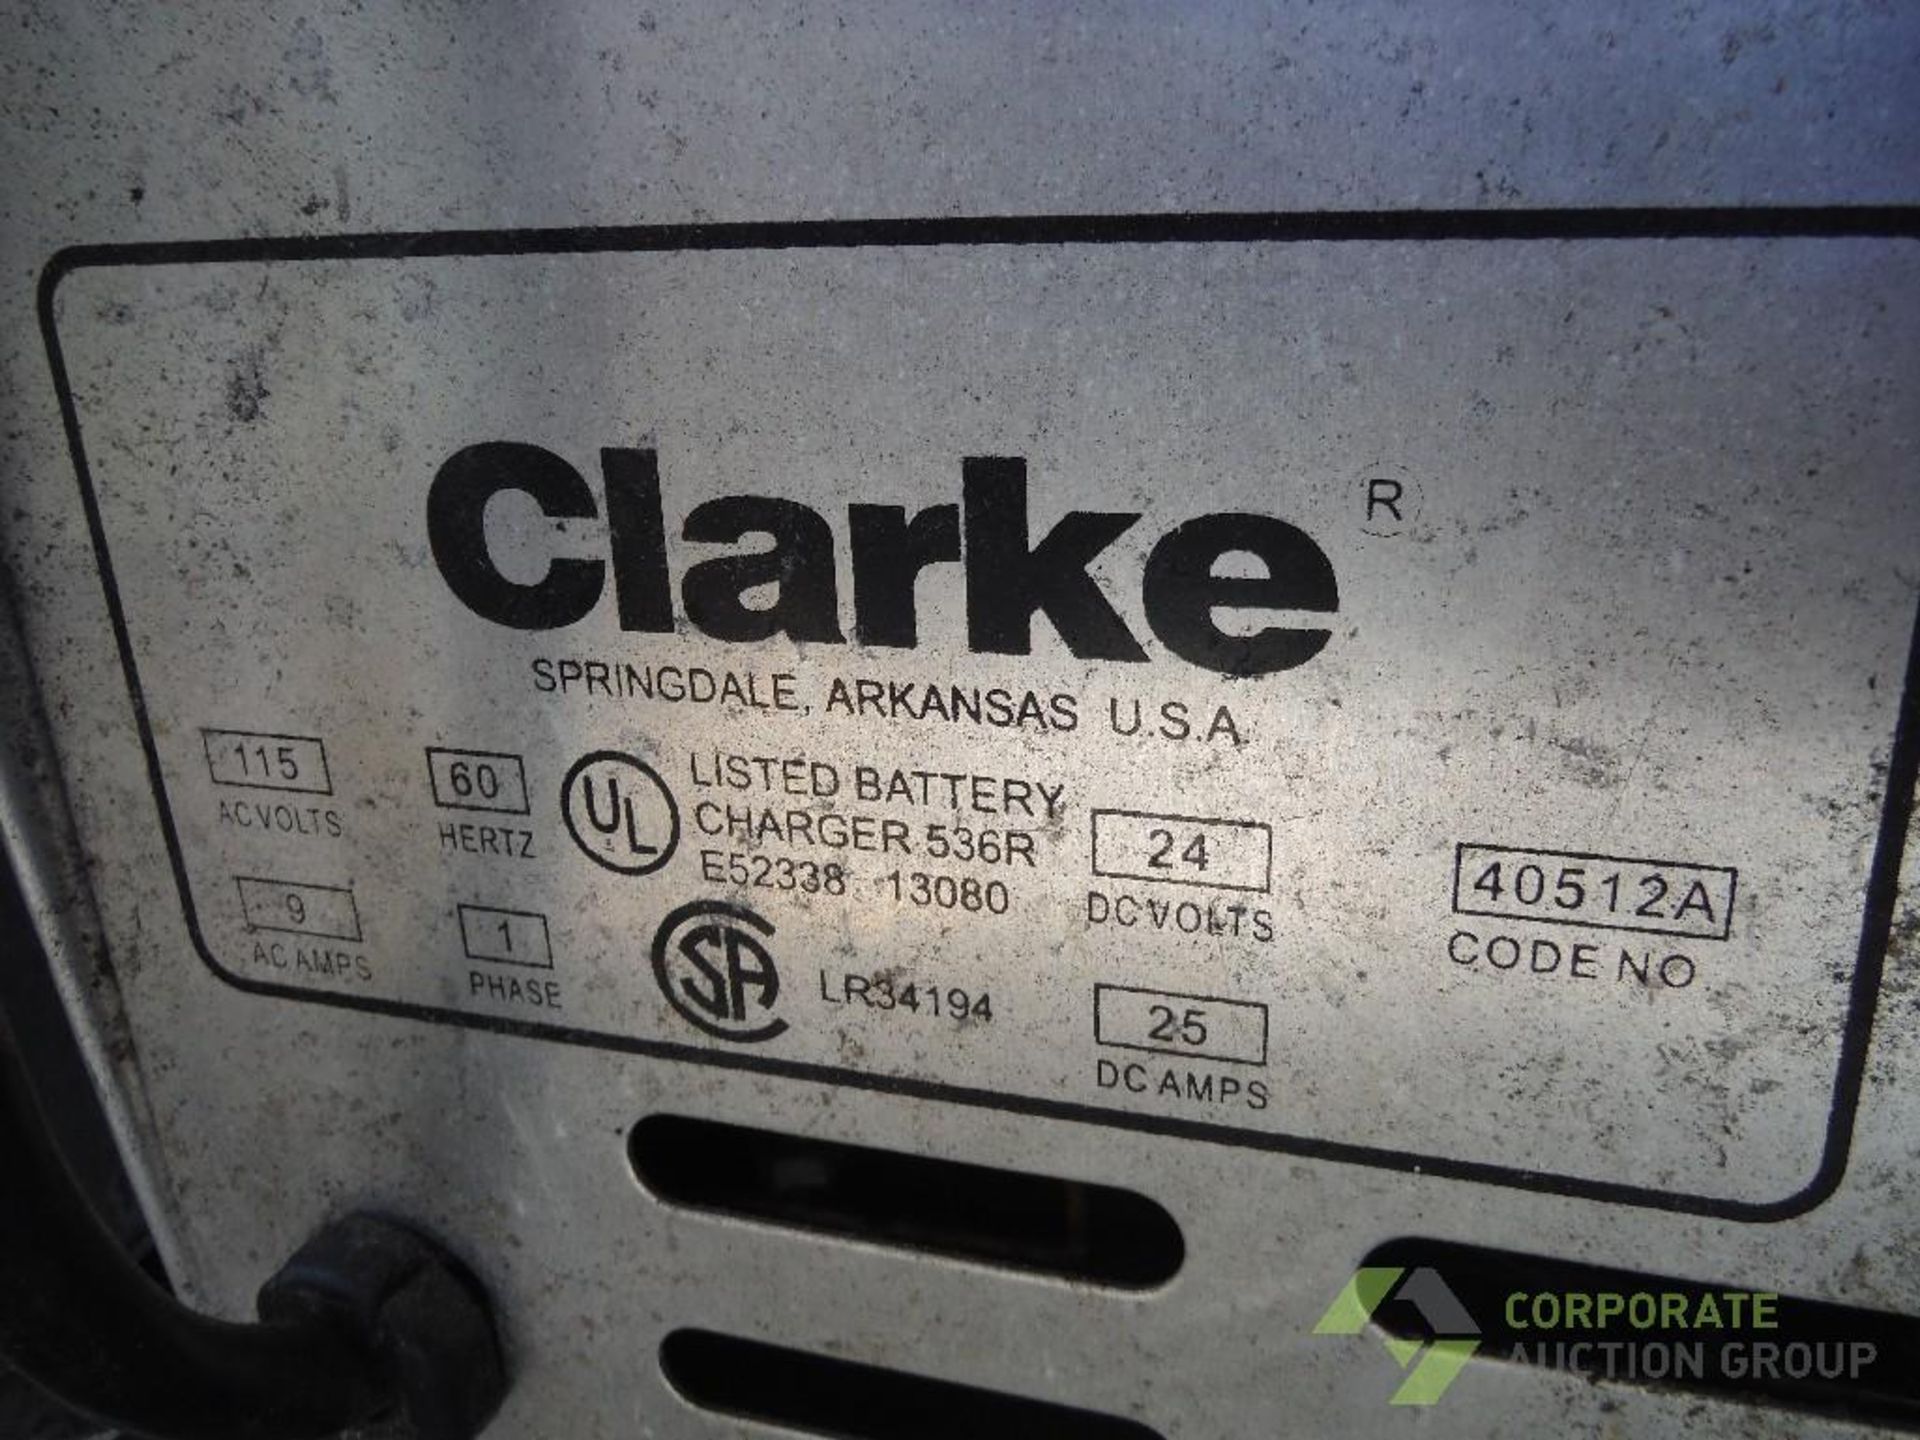 Clark 24 volt battery charger, SN 410402086 - Image 3 of 3